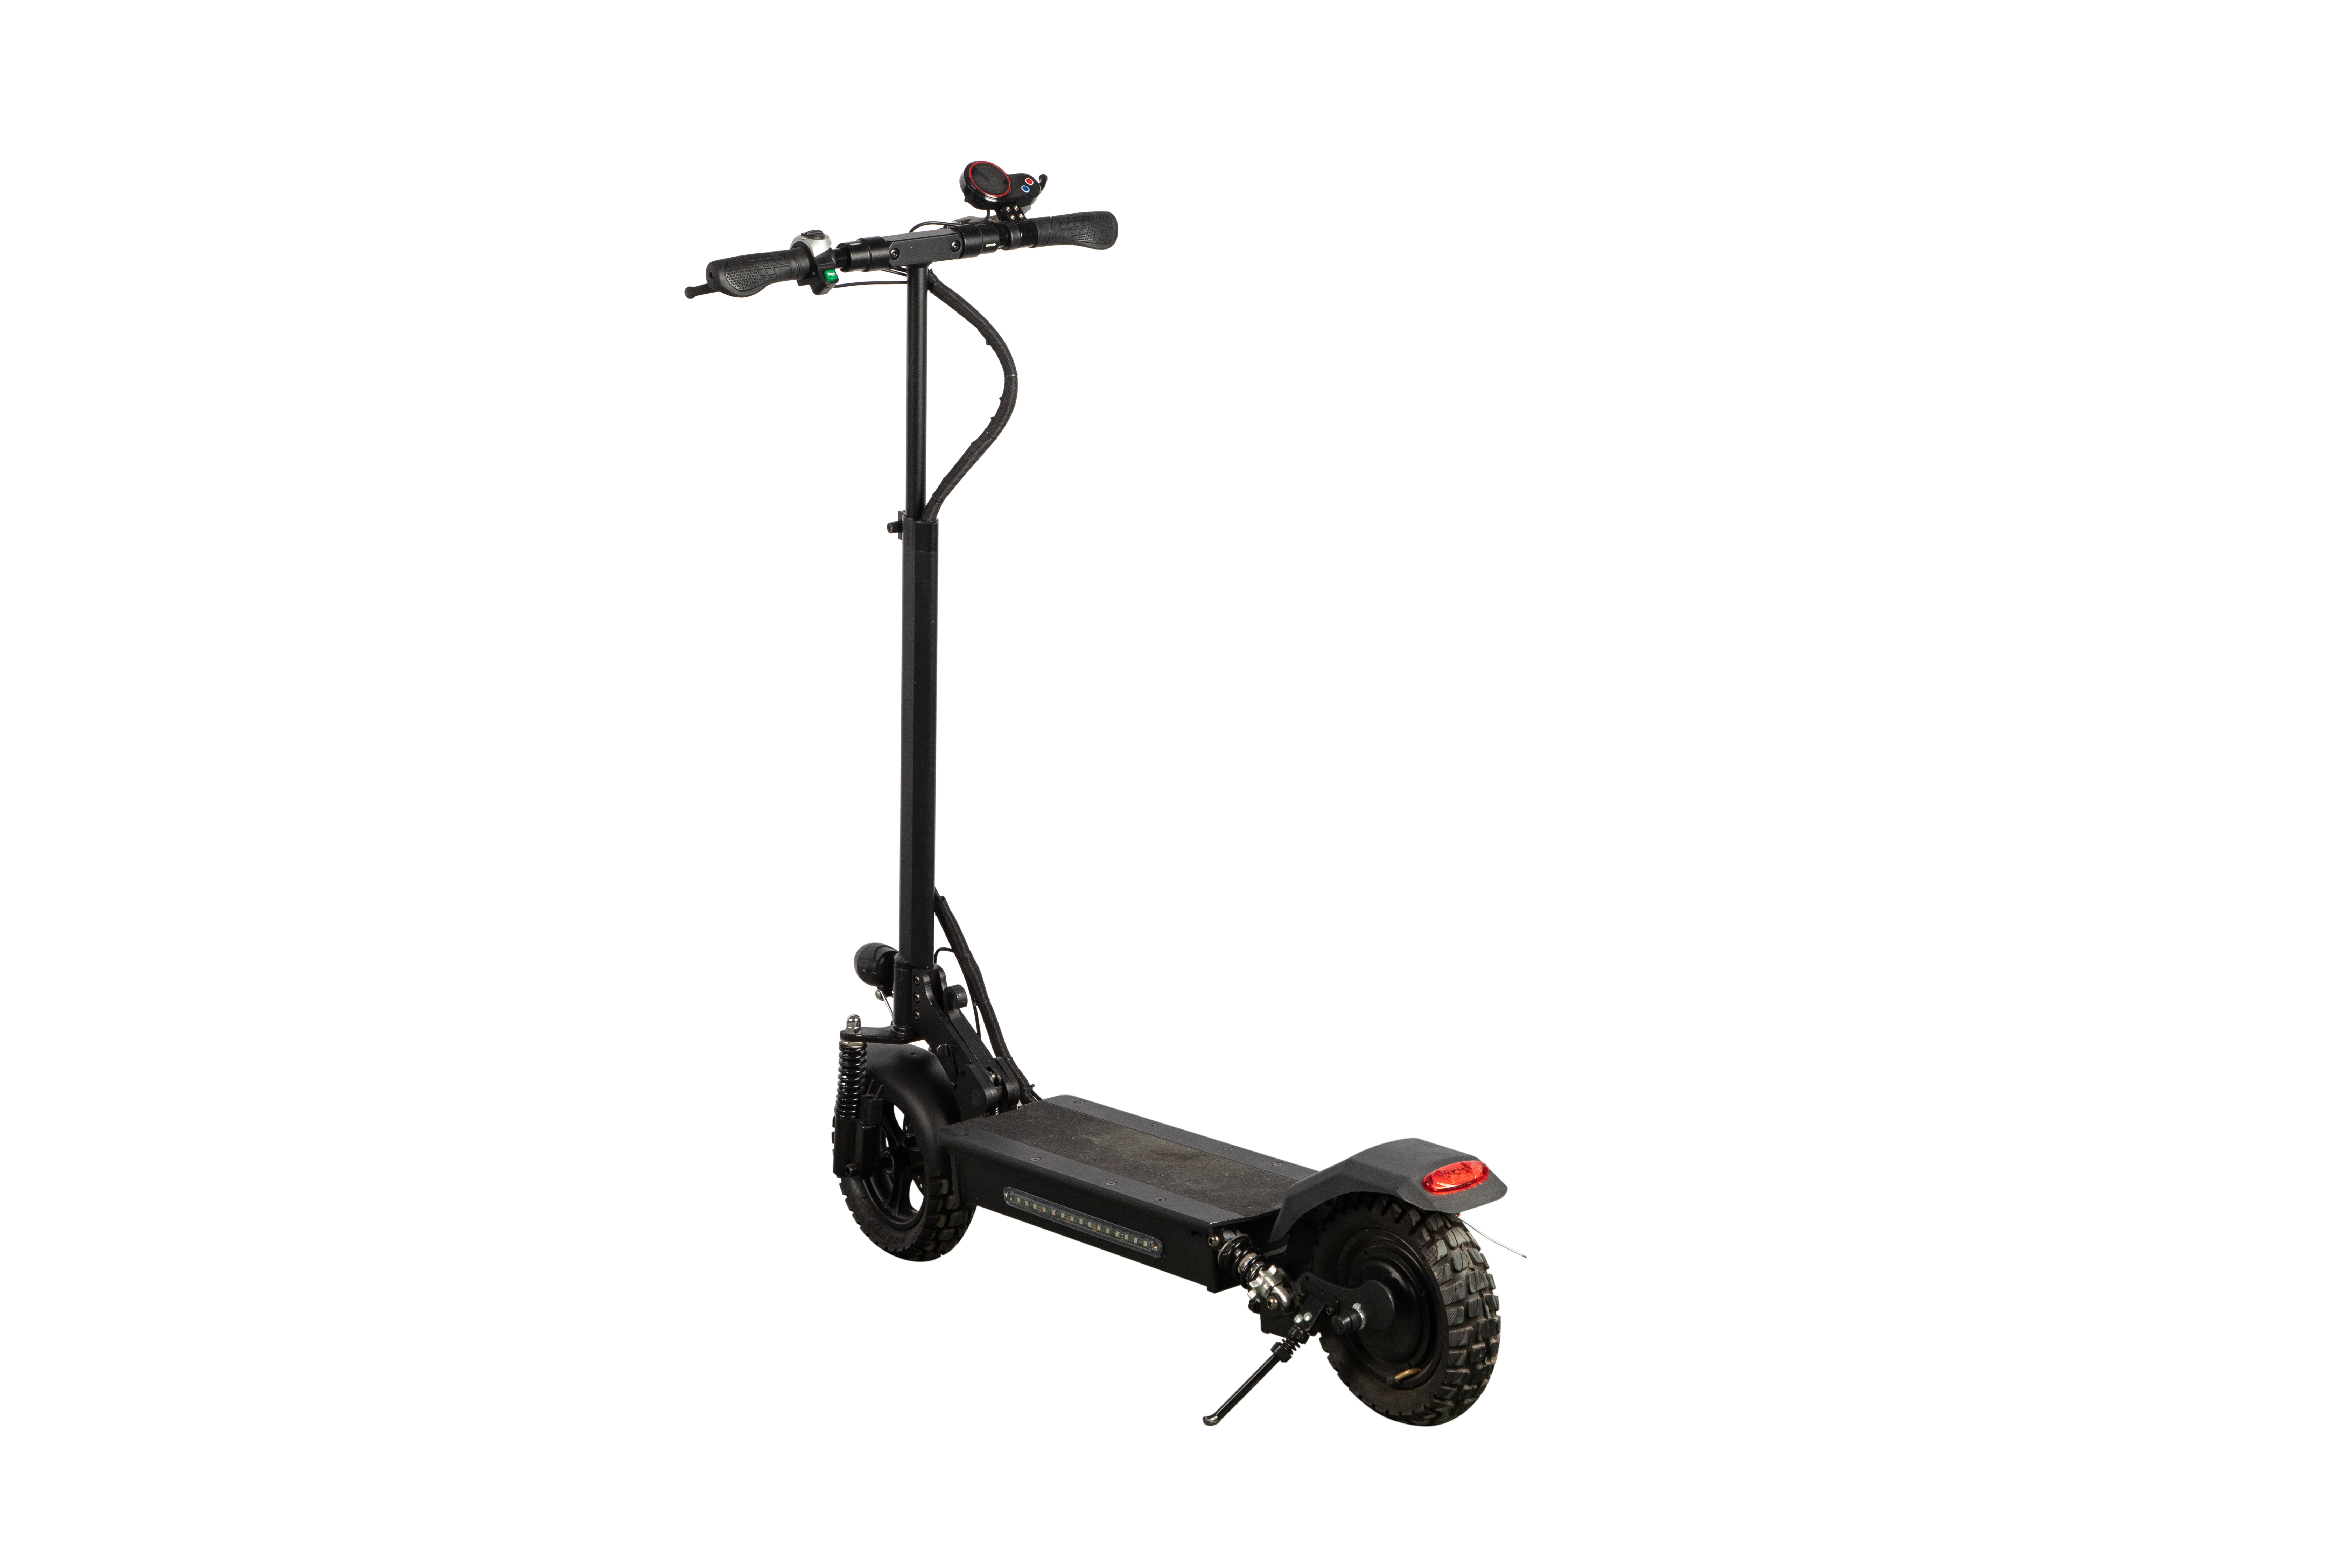  48V 10AH LITHIUM BATTERY 10 INCHES WHEEL ELECTRIC SCOOTER (X TRACK-GT-2)